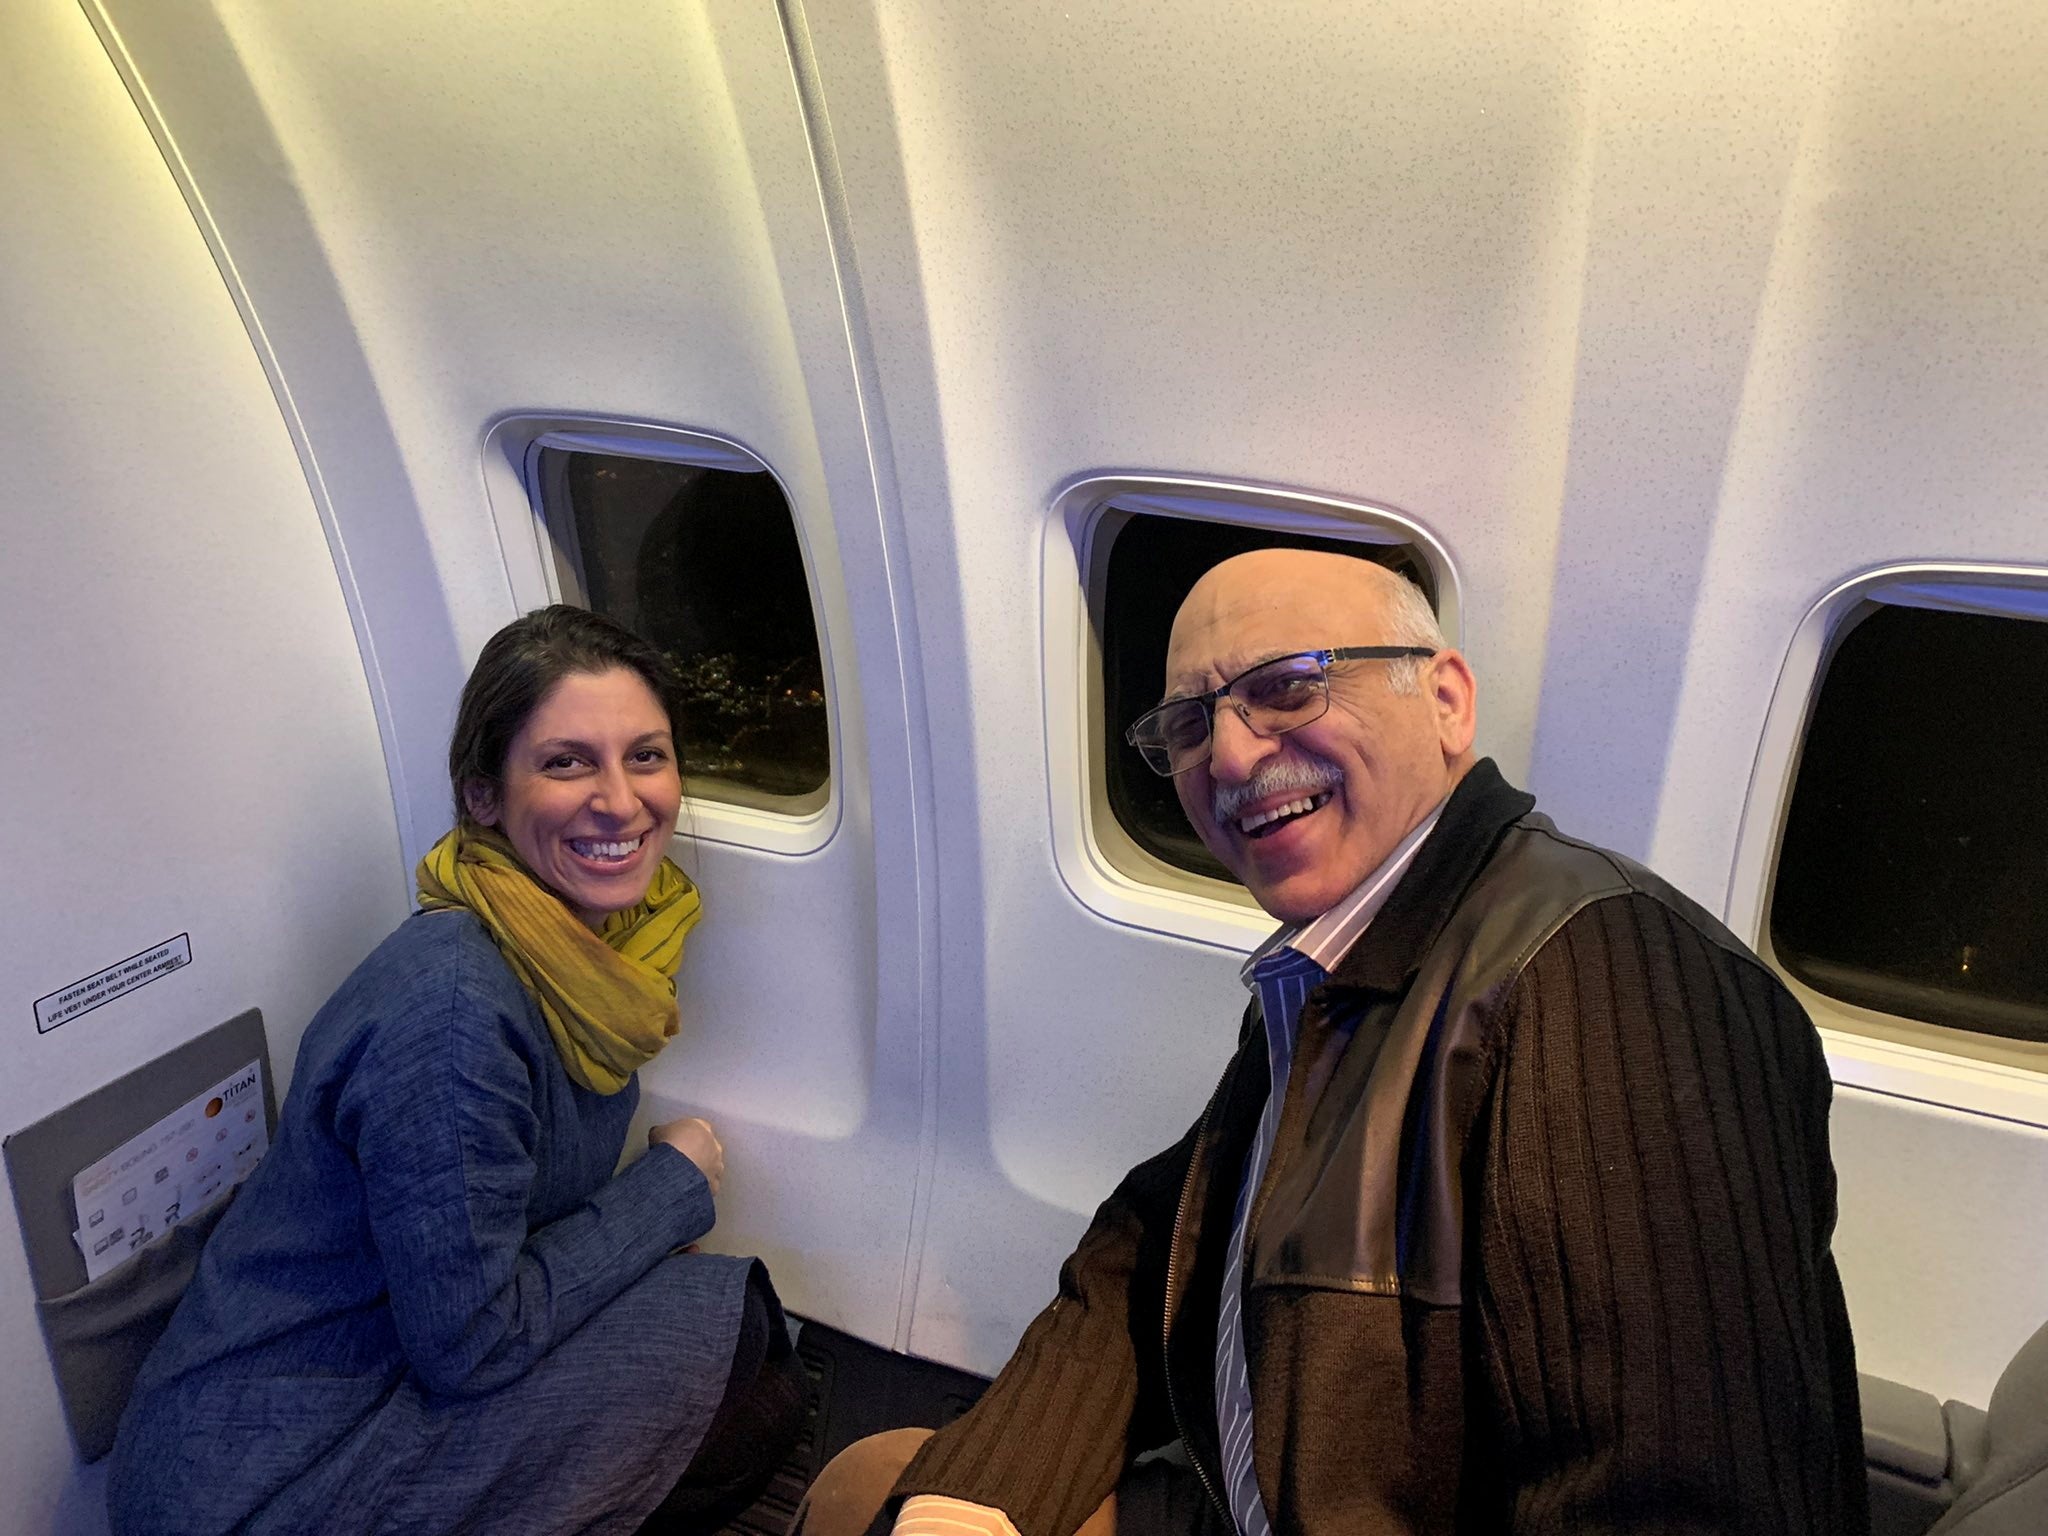 Mr Ashoori, pictured with Nazanin Zaghari-Ratcliffe, on their way back to the UK after being released from prison